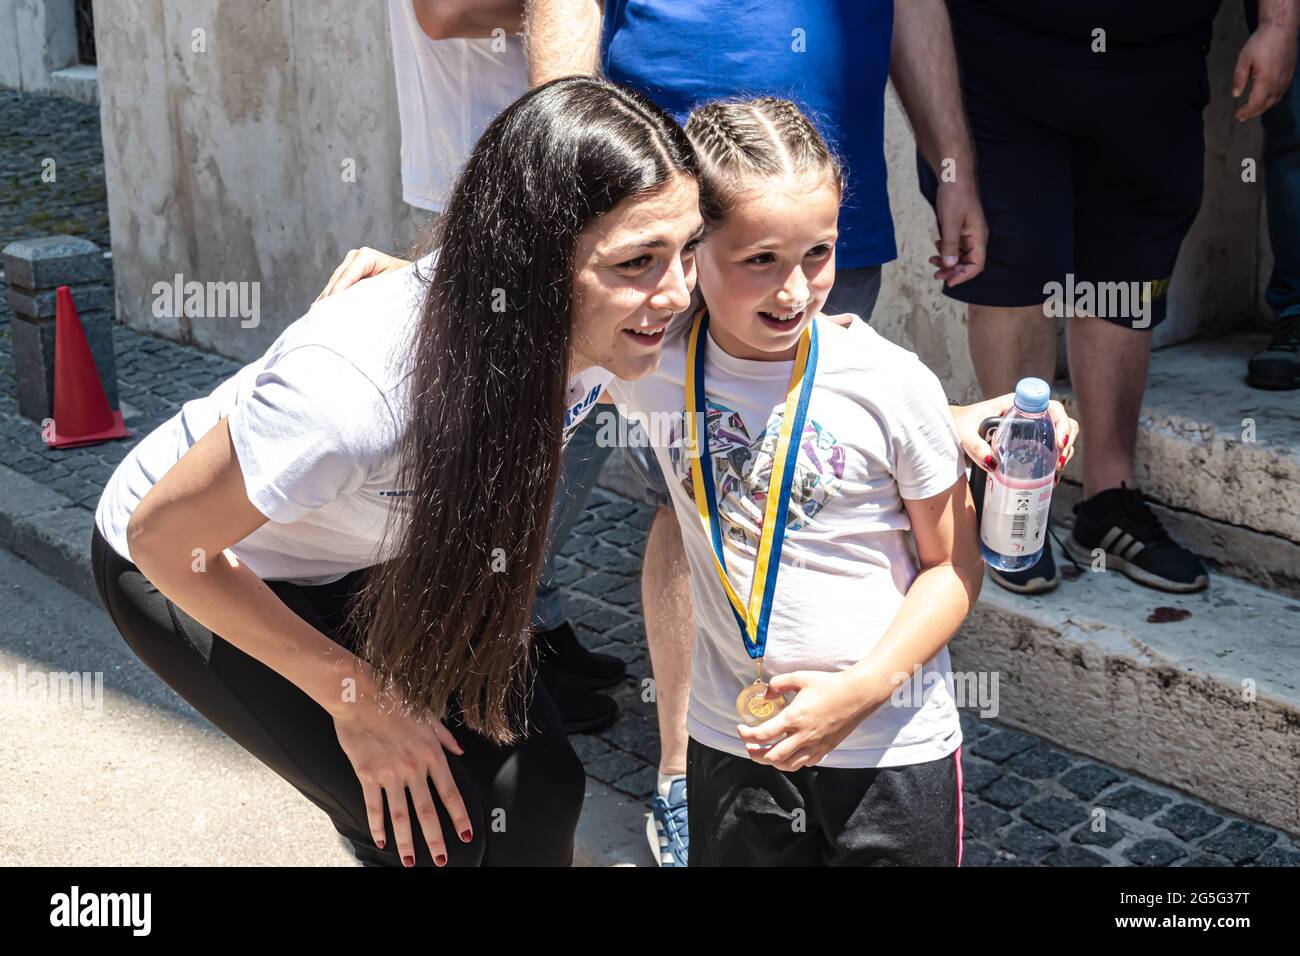 Marica Gajic one of the best BH female basketball players with young fan Stock Photo